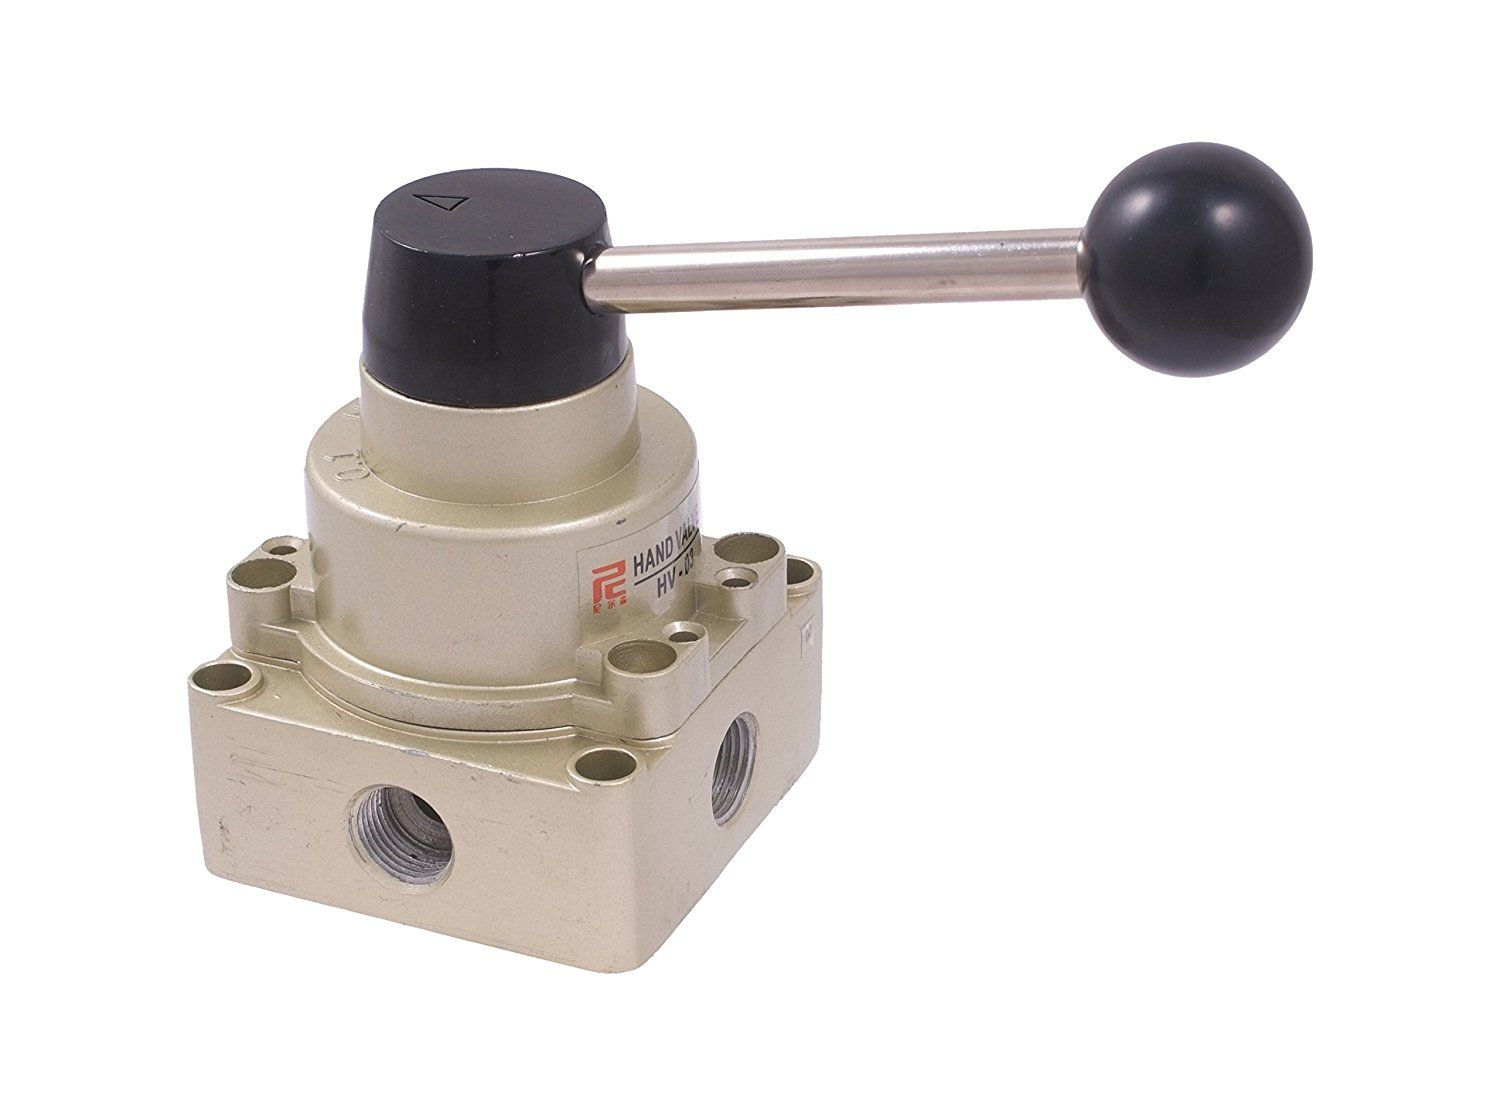 4-WAY HAND OPERATED ROTARY DISC TYPE VALVE WITH 3/8 NPT INLET (8401-0255)